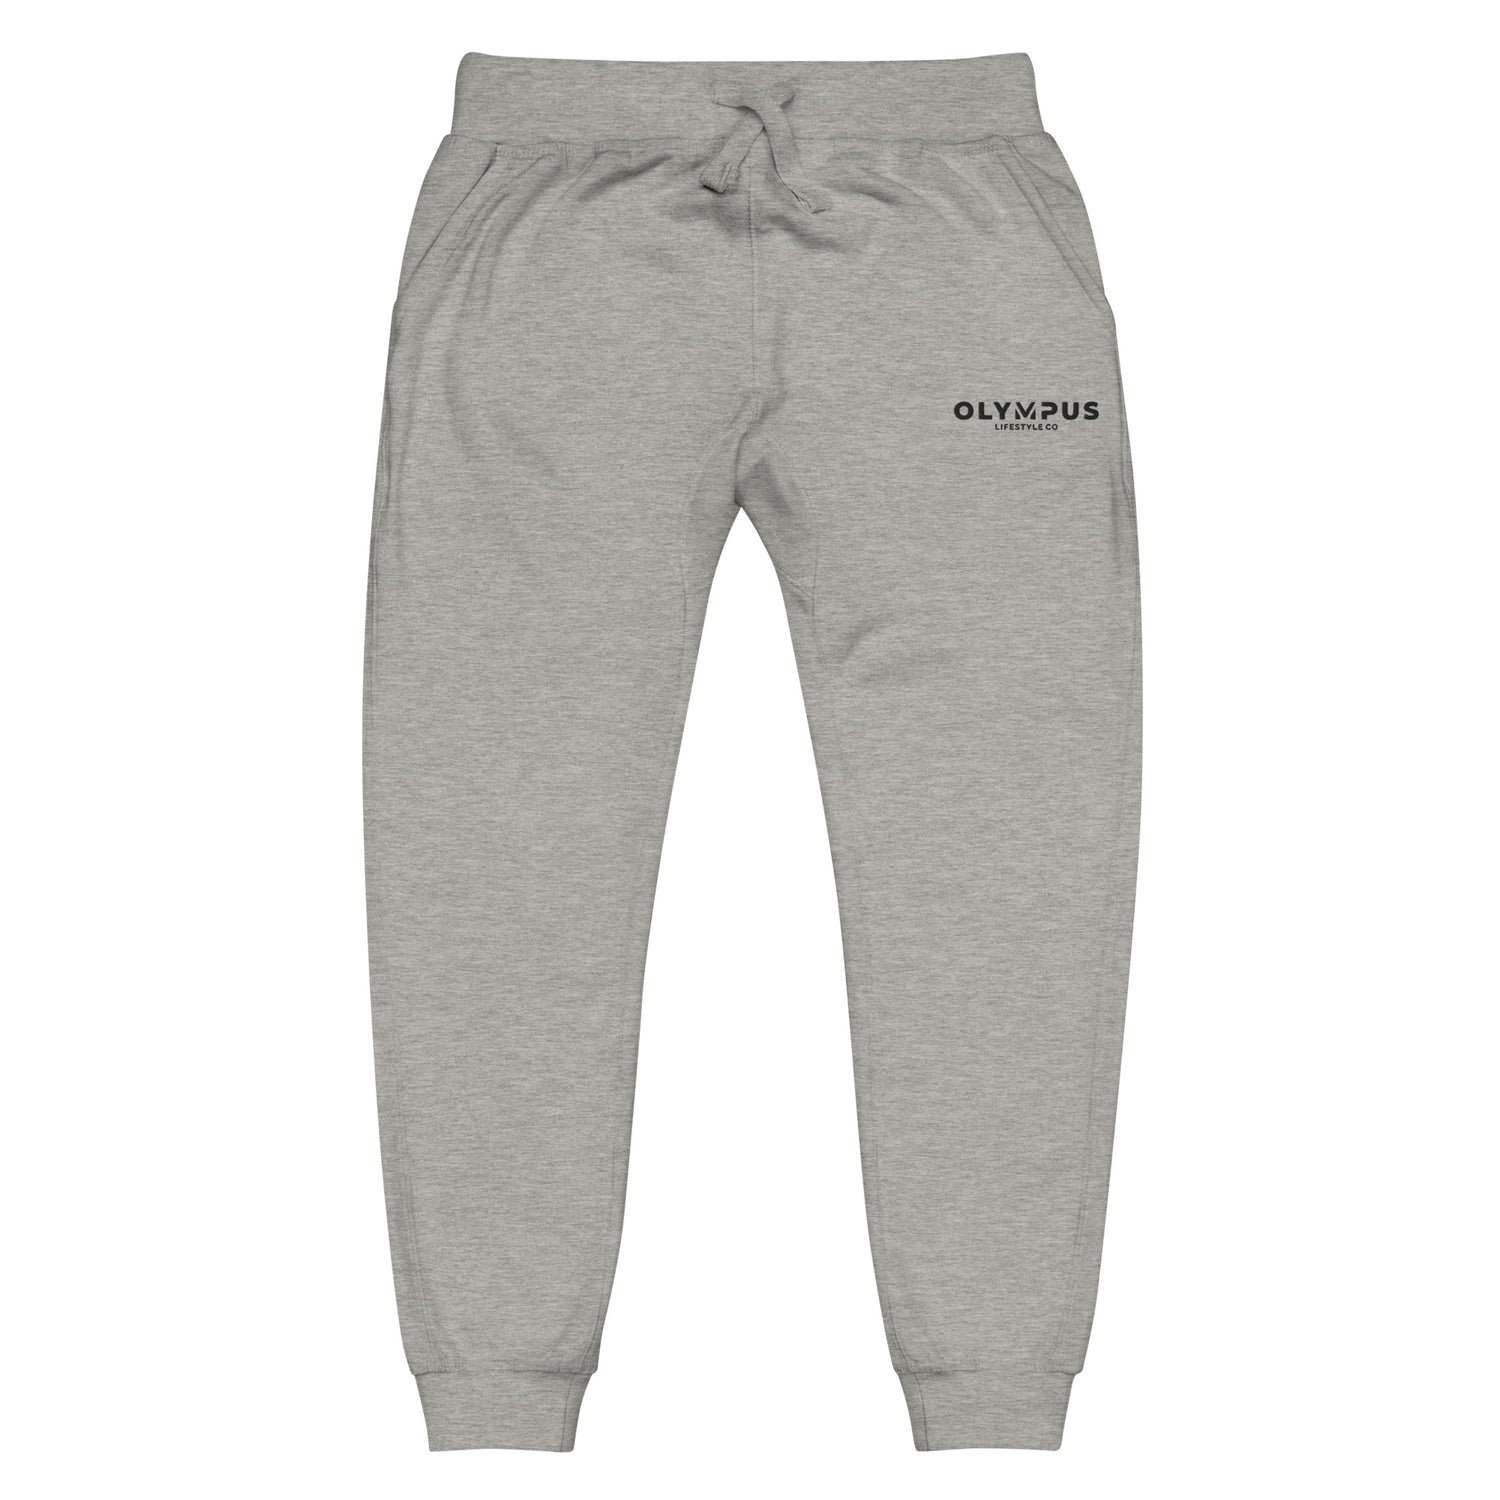 Gym Pants for Women